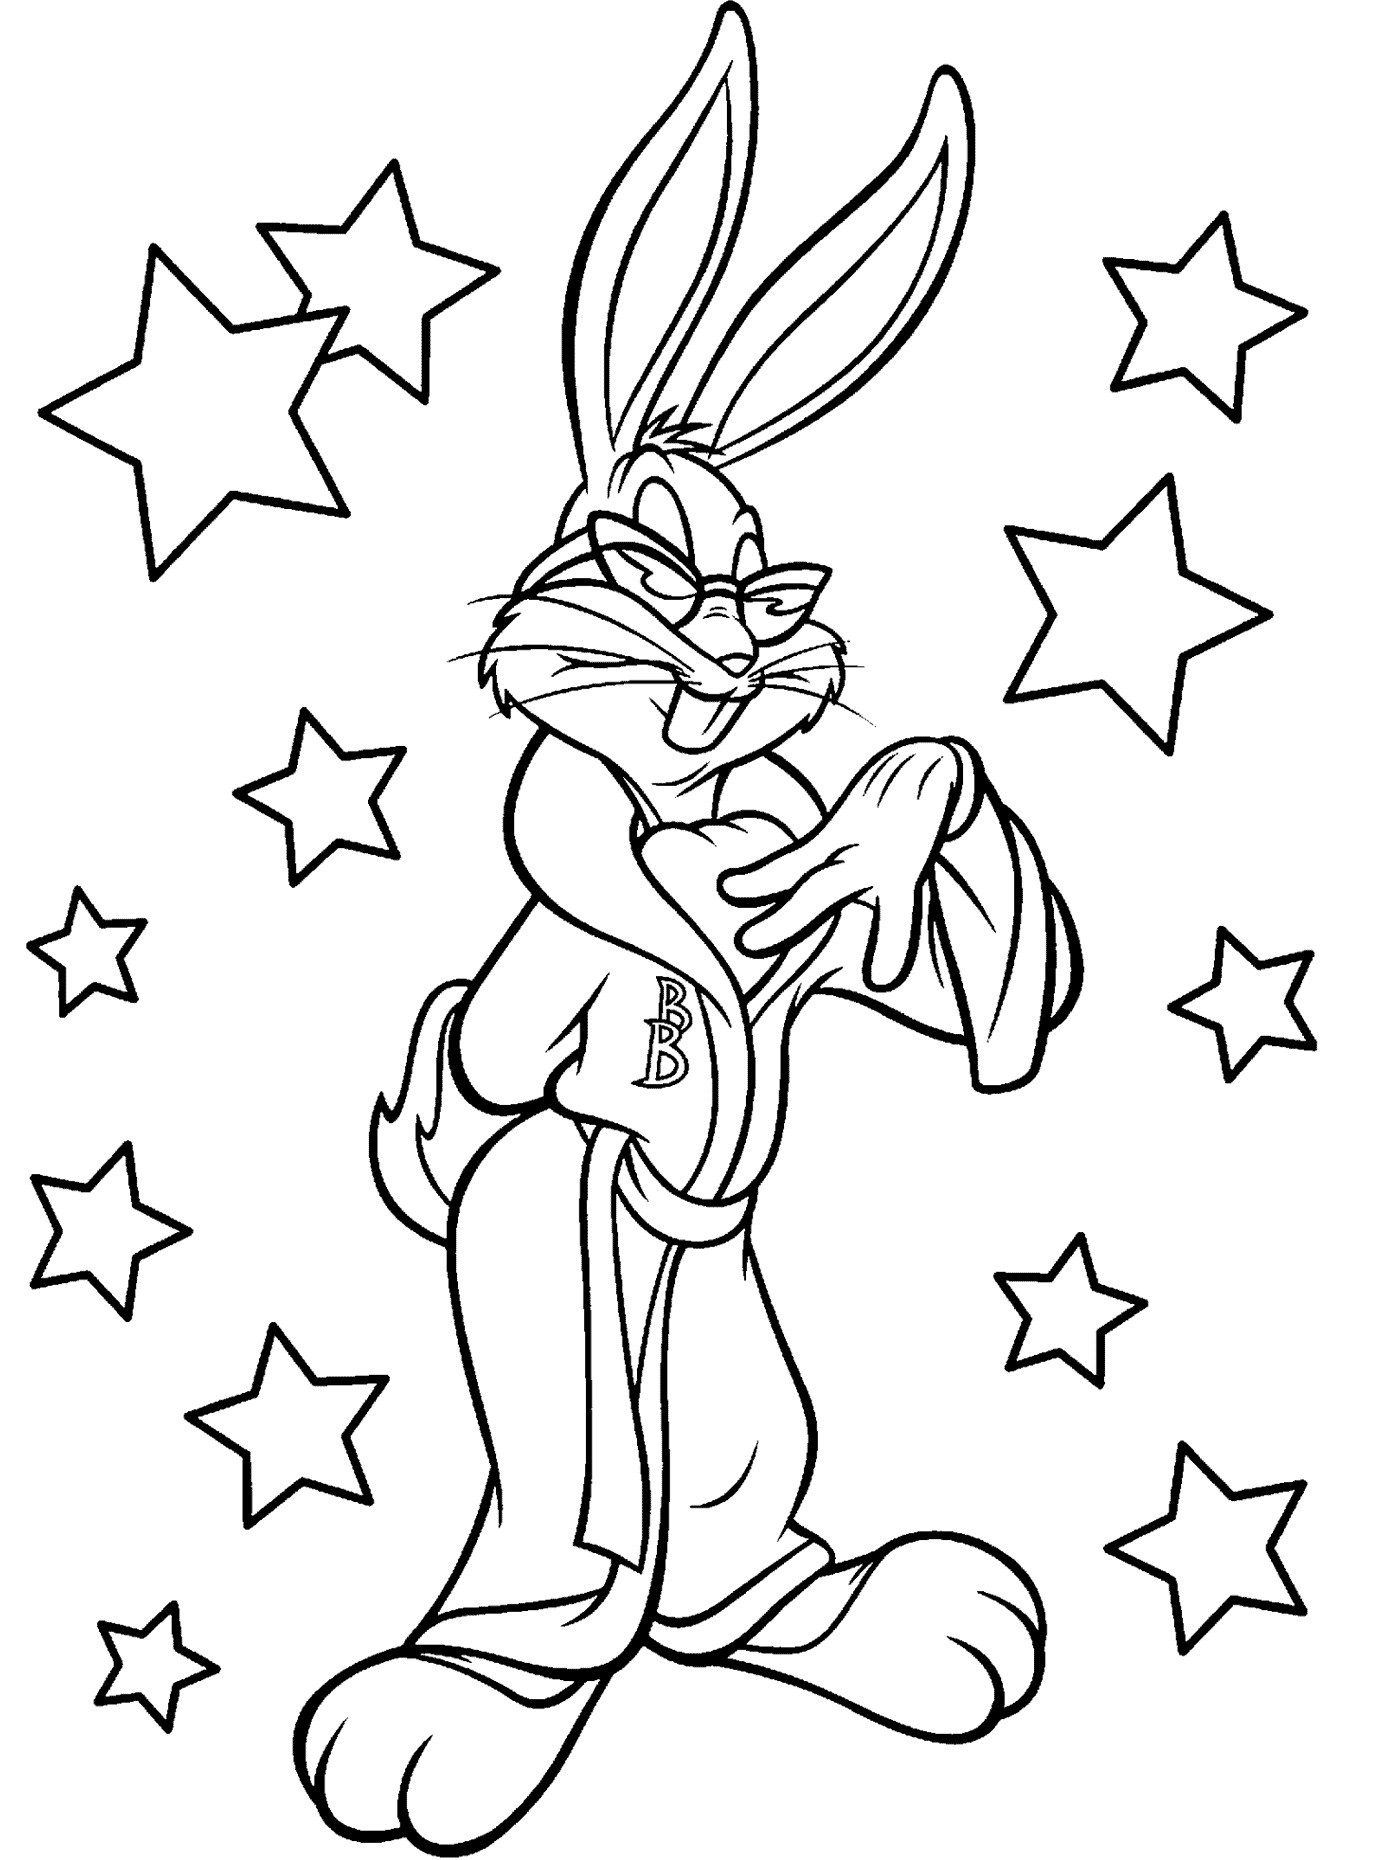 Bug Coloring Pages For Kids
 Free Printable Bugs Bunny Coloring Pages For Kids